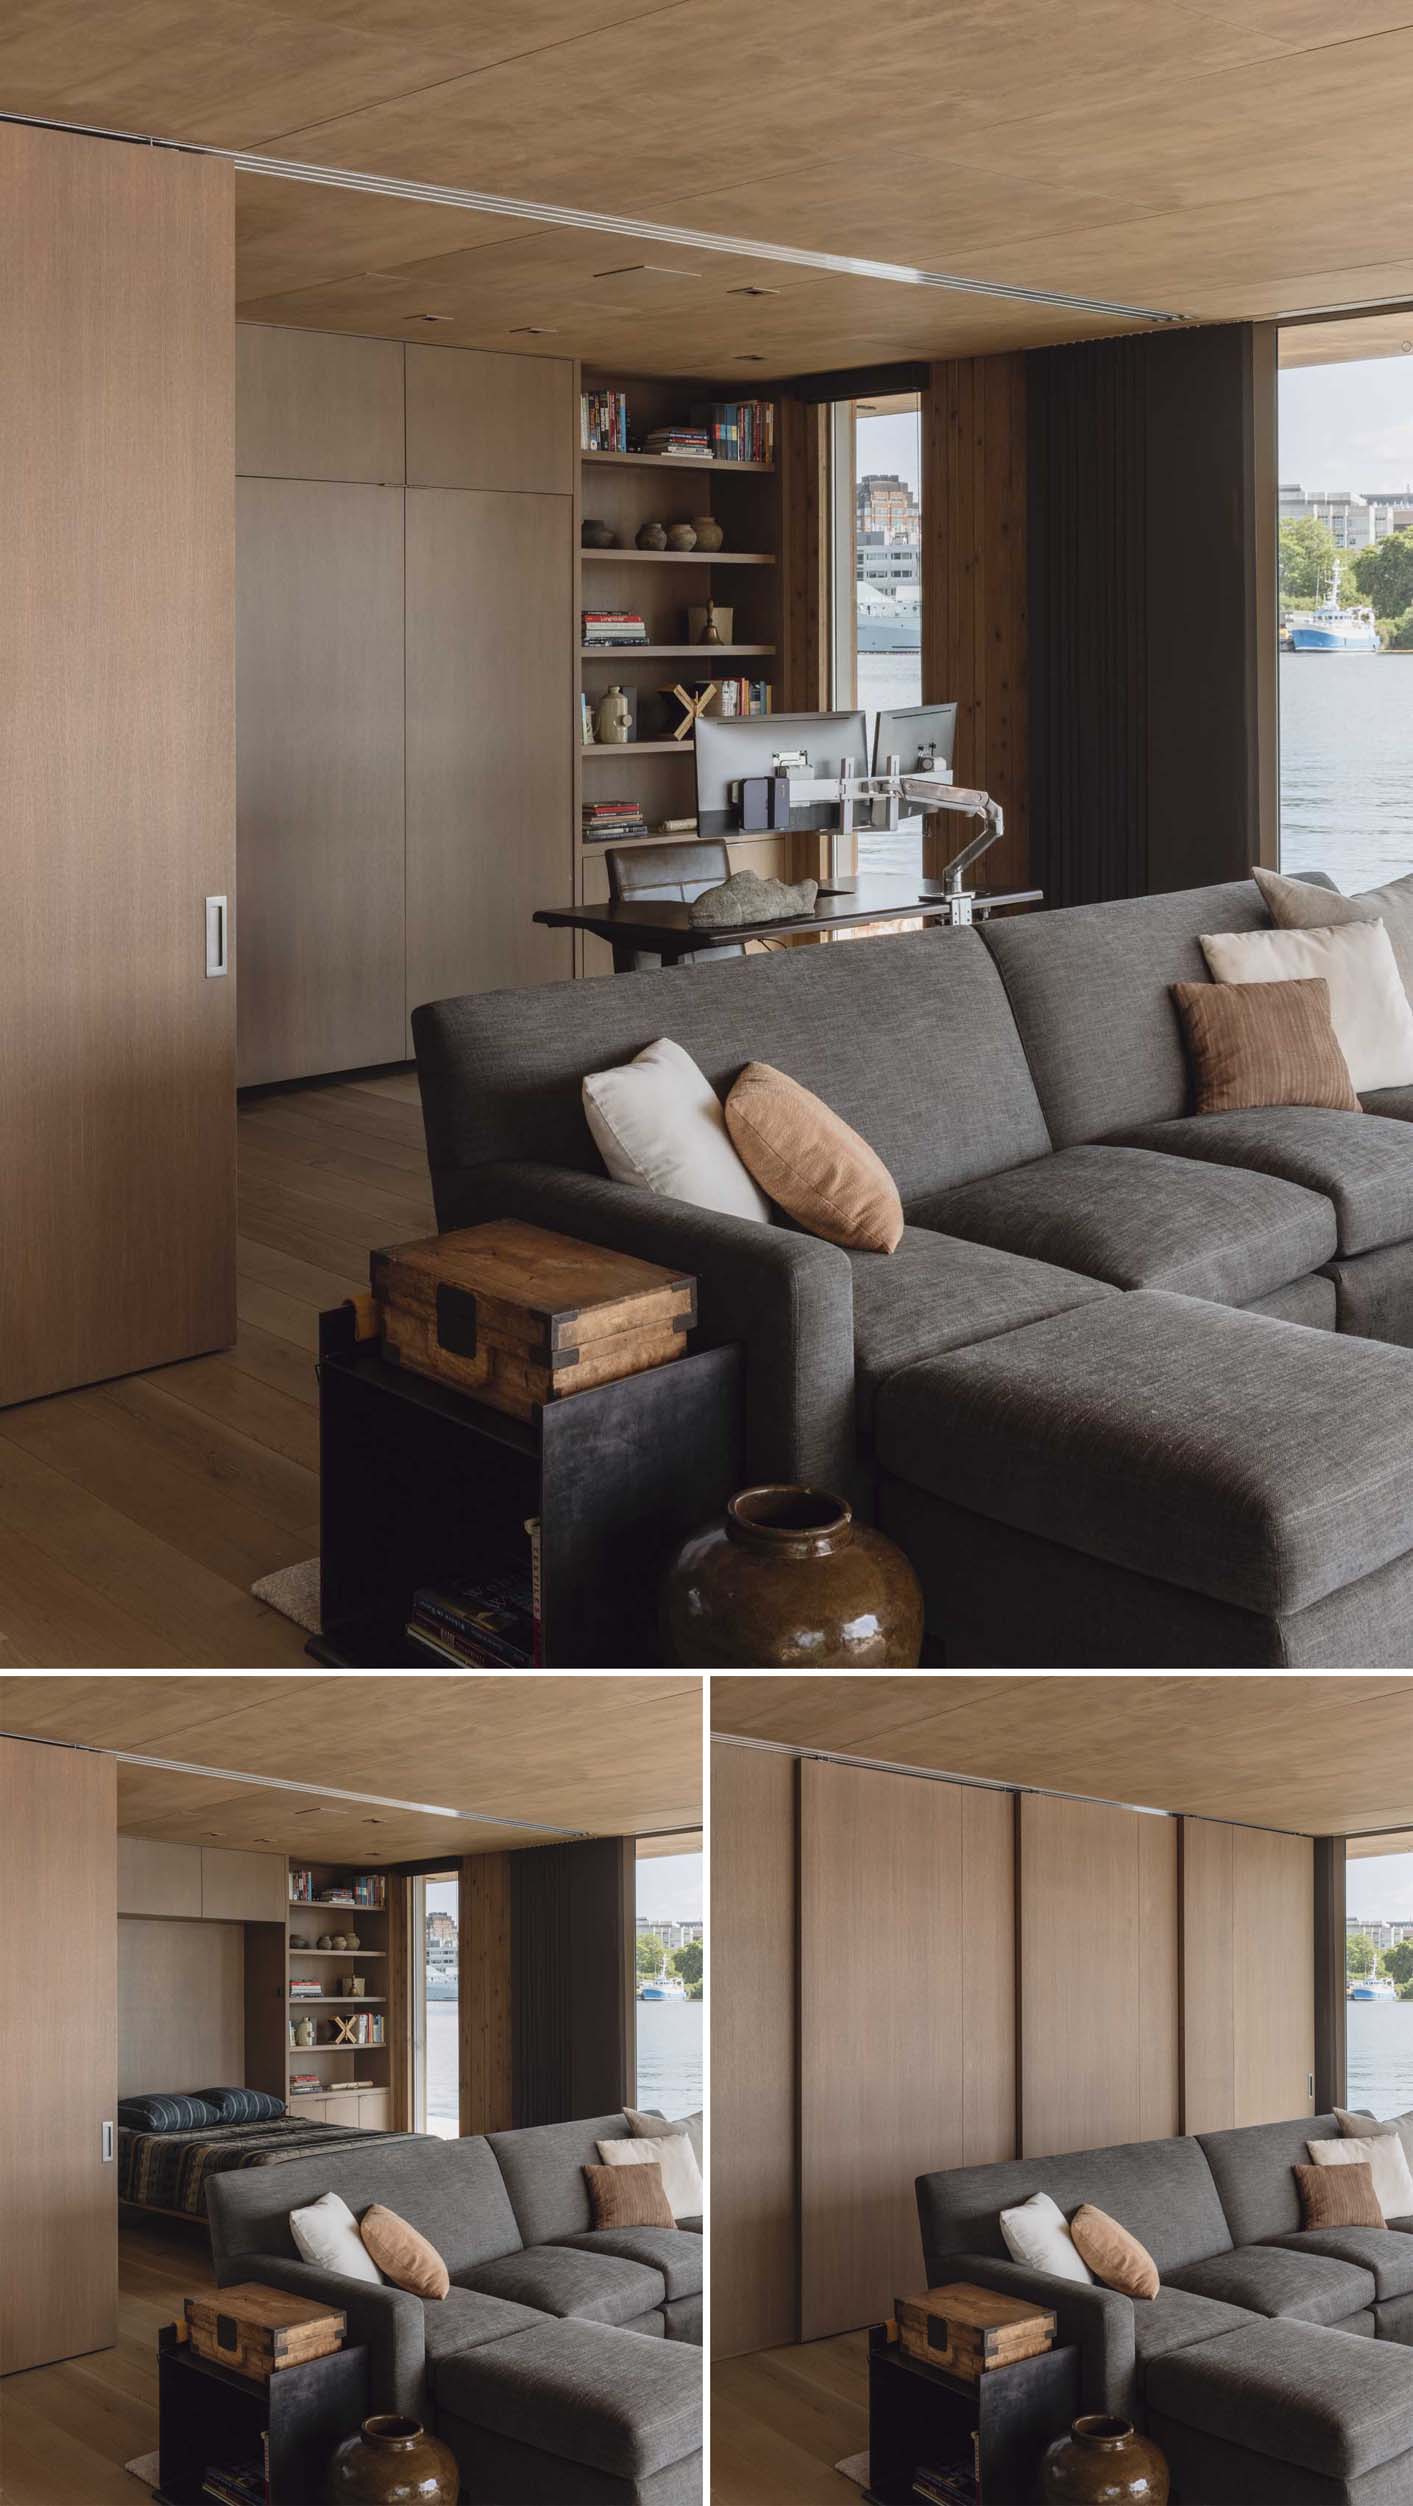 Behind the living room in this modern floathome, there's also a home office that doubles as a bedroom with a pull-down bed. Sliding wood panels can be pulled across to become a wall when needed.